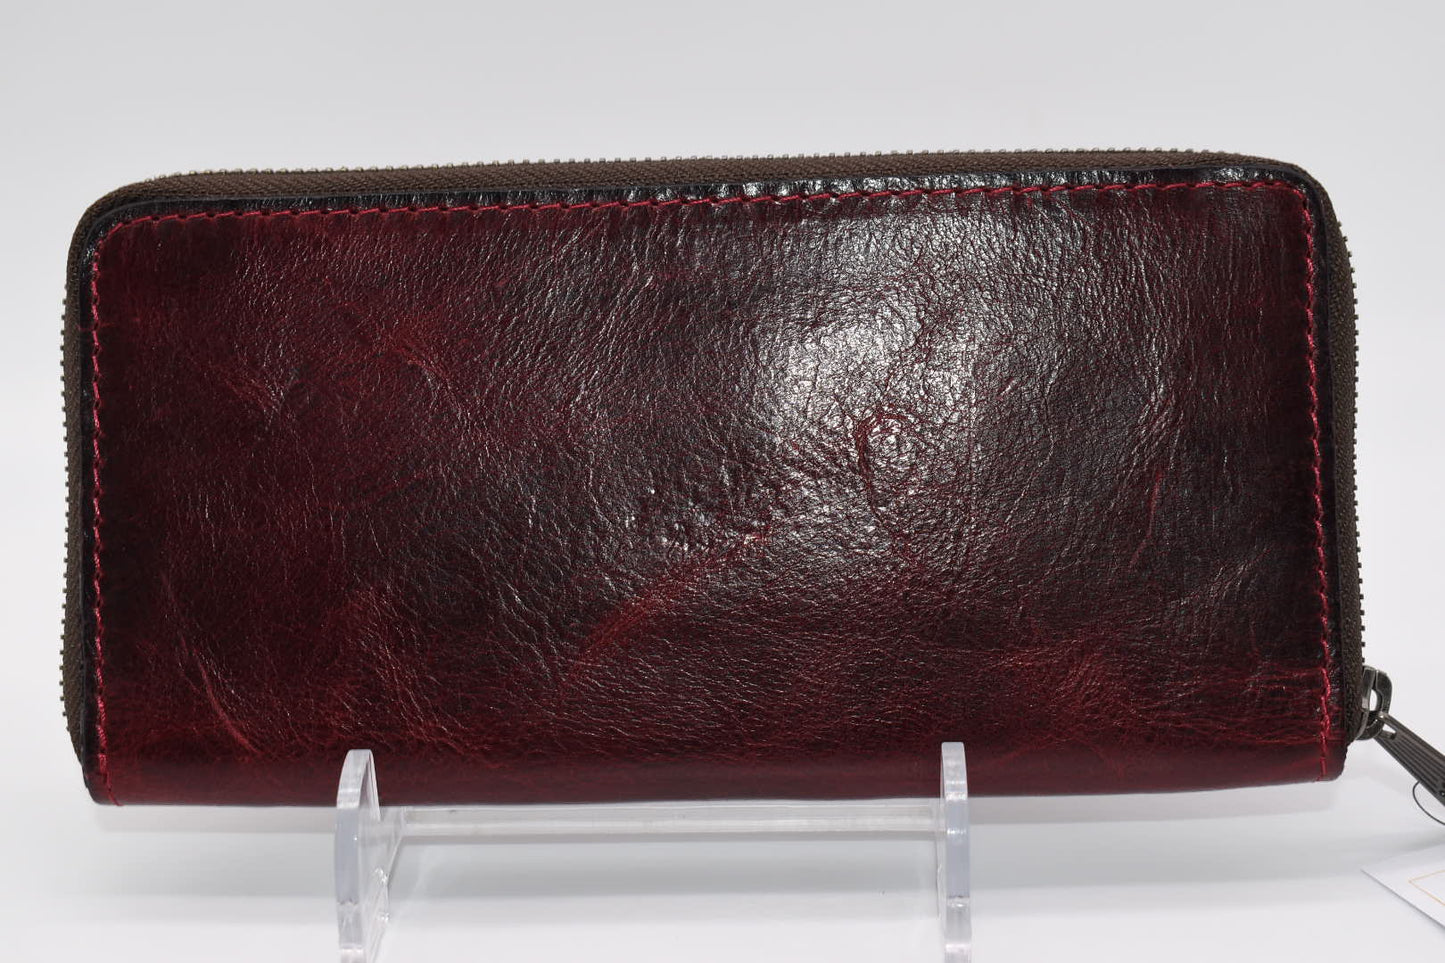 Patricia Nash Lauria Wallet in Distressed Leather Red